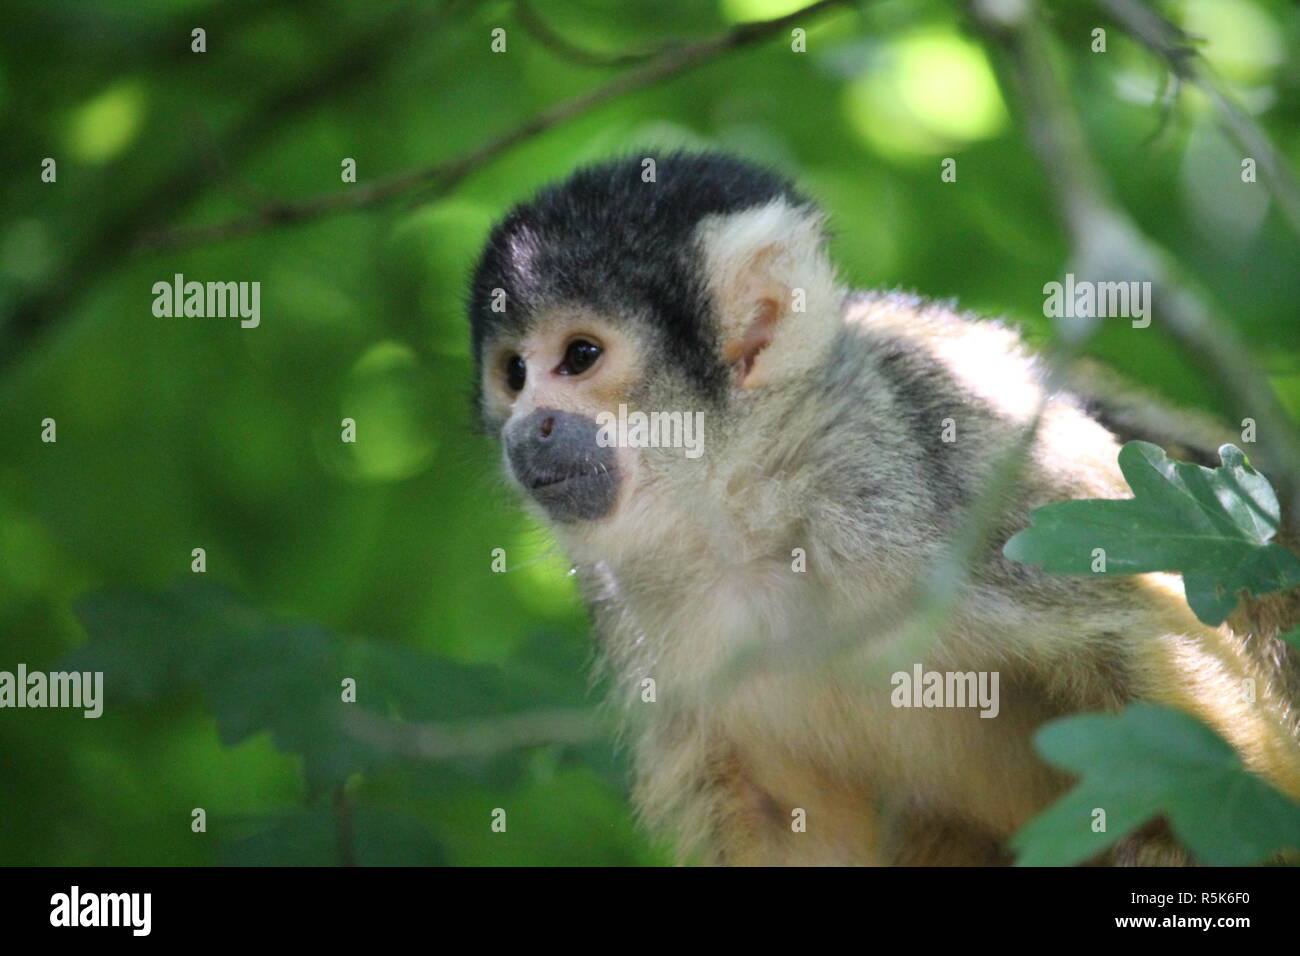 Affen High Resolution Stock Photography and Images - Alamy